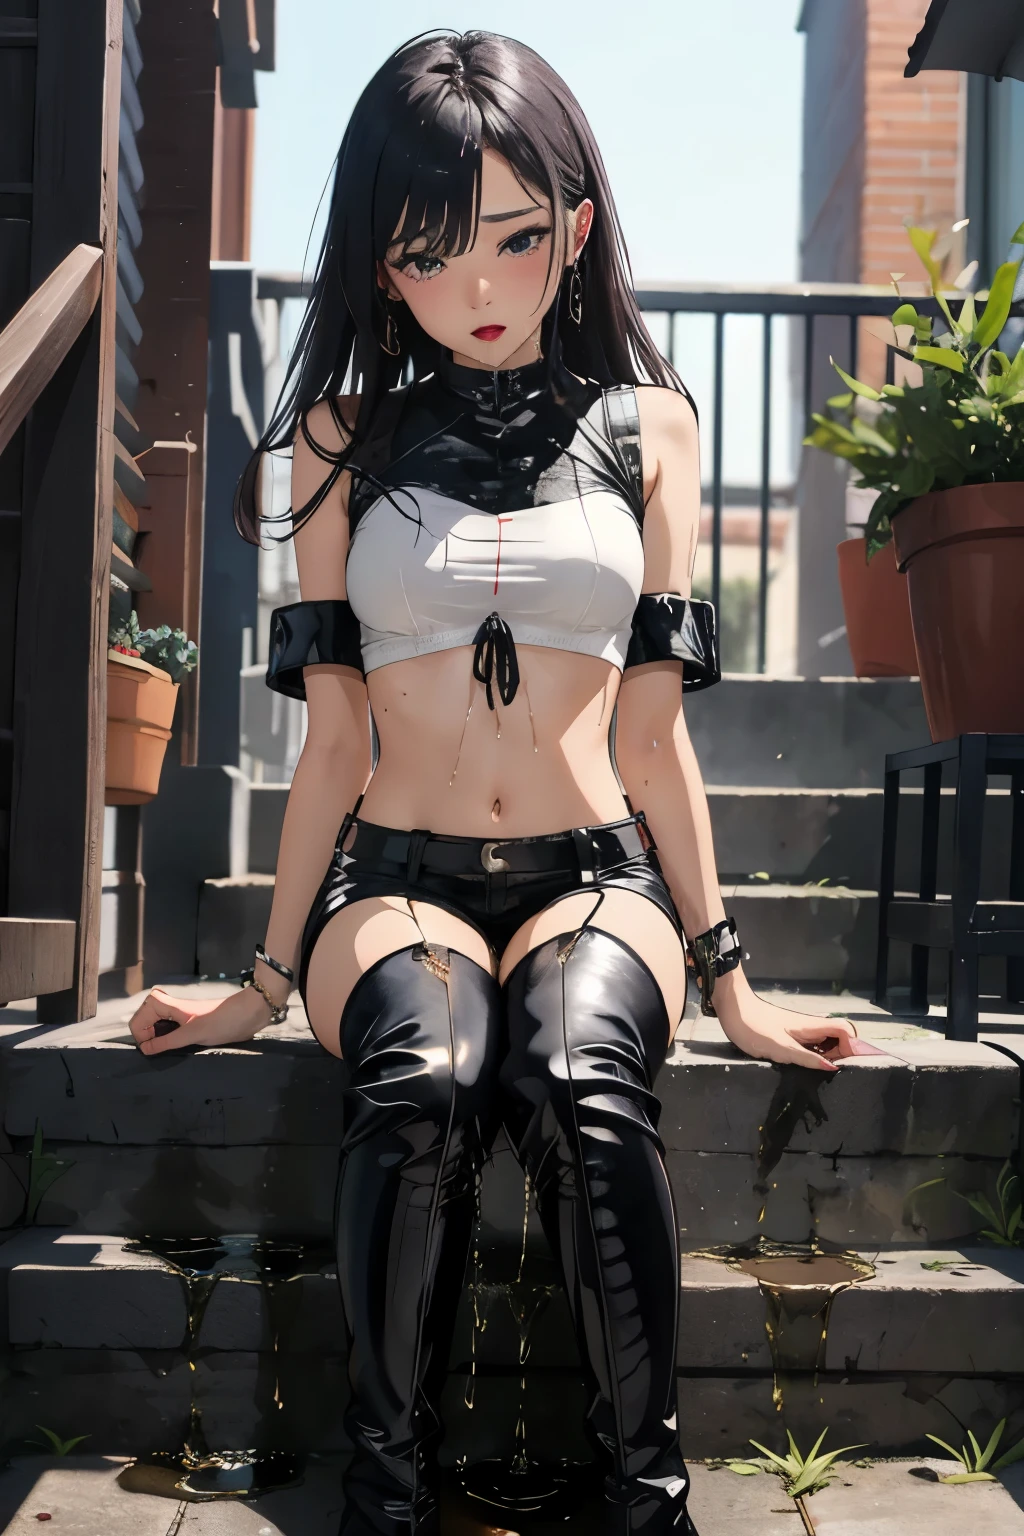 anime, best quality, high quality, highres, beautiful women, high detail, good lighting, lewd, hentai, (no nudity), ((((bike shorts)))), ((tight leather top)), ((((leather thigh high boots)))), bare midriff, (wet pants), (((wetting herself))), (((peeing herself))), (((peeing self))), (pee streaming down legs), peeing stain, (puddle), (thick thighs), nice long legs, lipstick, detailed face, pretty face, pretty hands, embarrassed blushing face, humiliated, ((sitting legs crossed)), hihelz